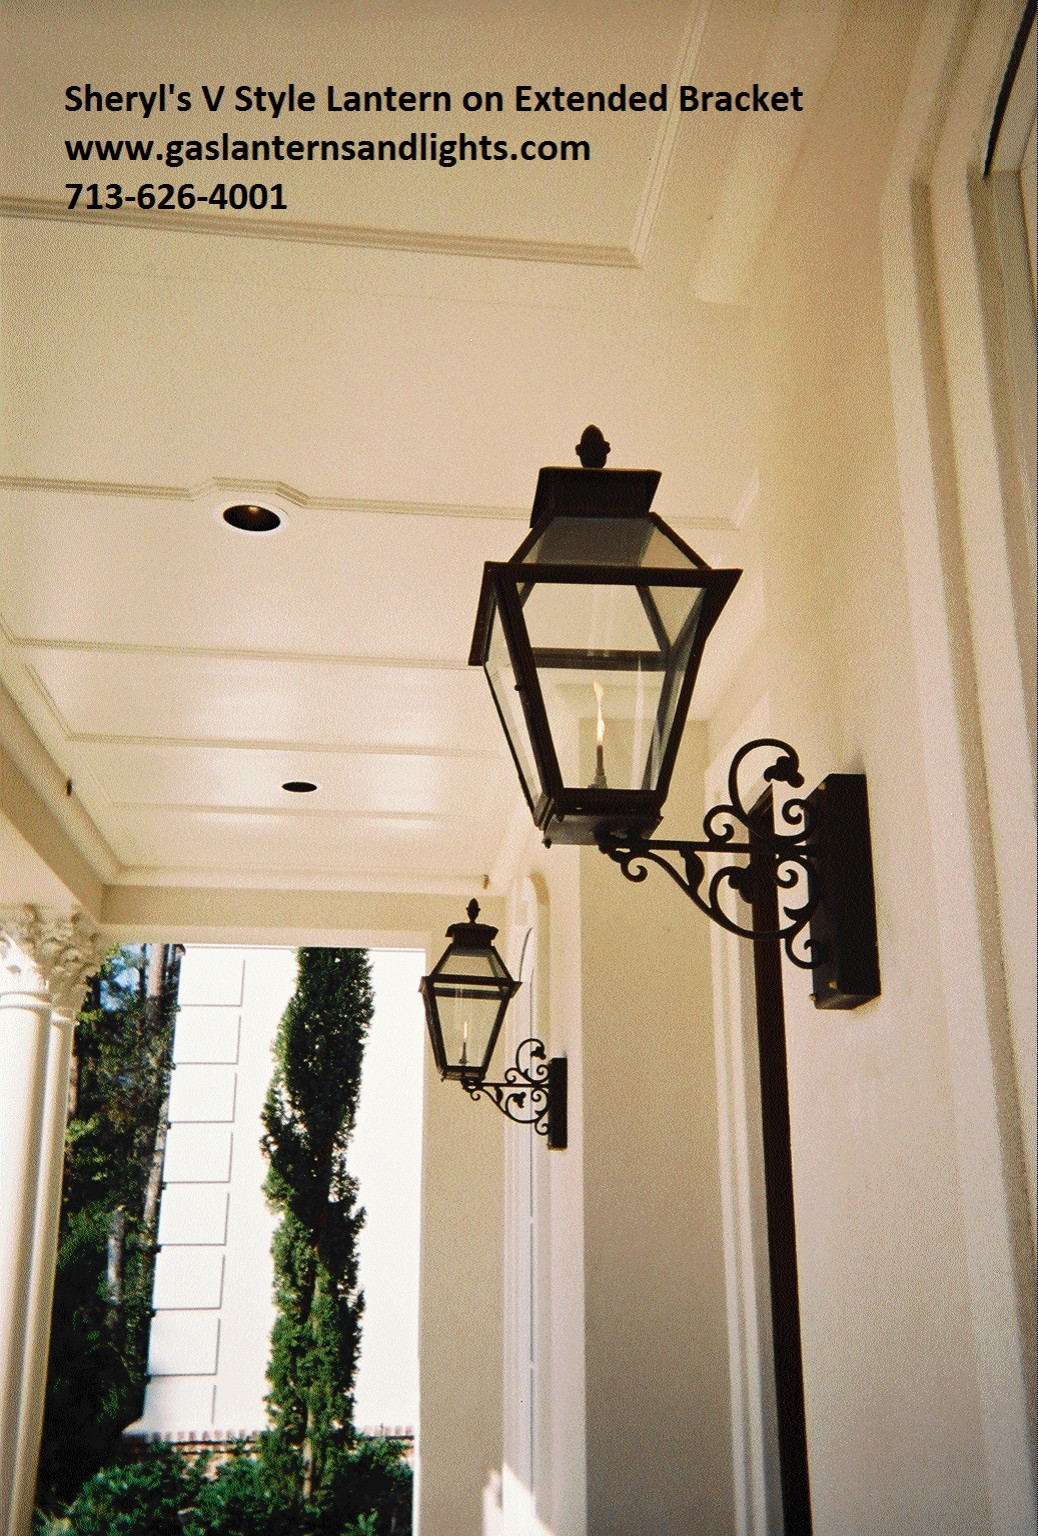 Sheryl's V Style Gas Lanterns on Extended Steel Wall Brackets